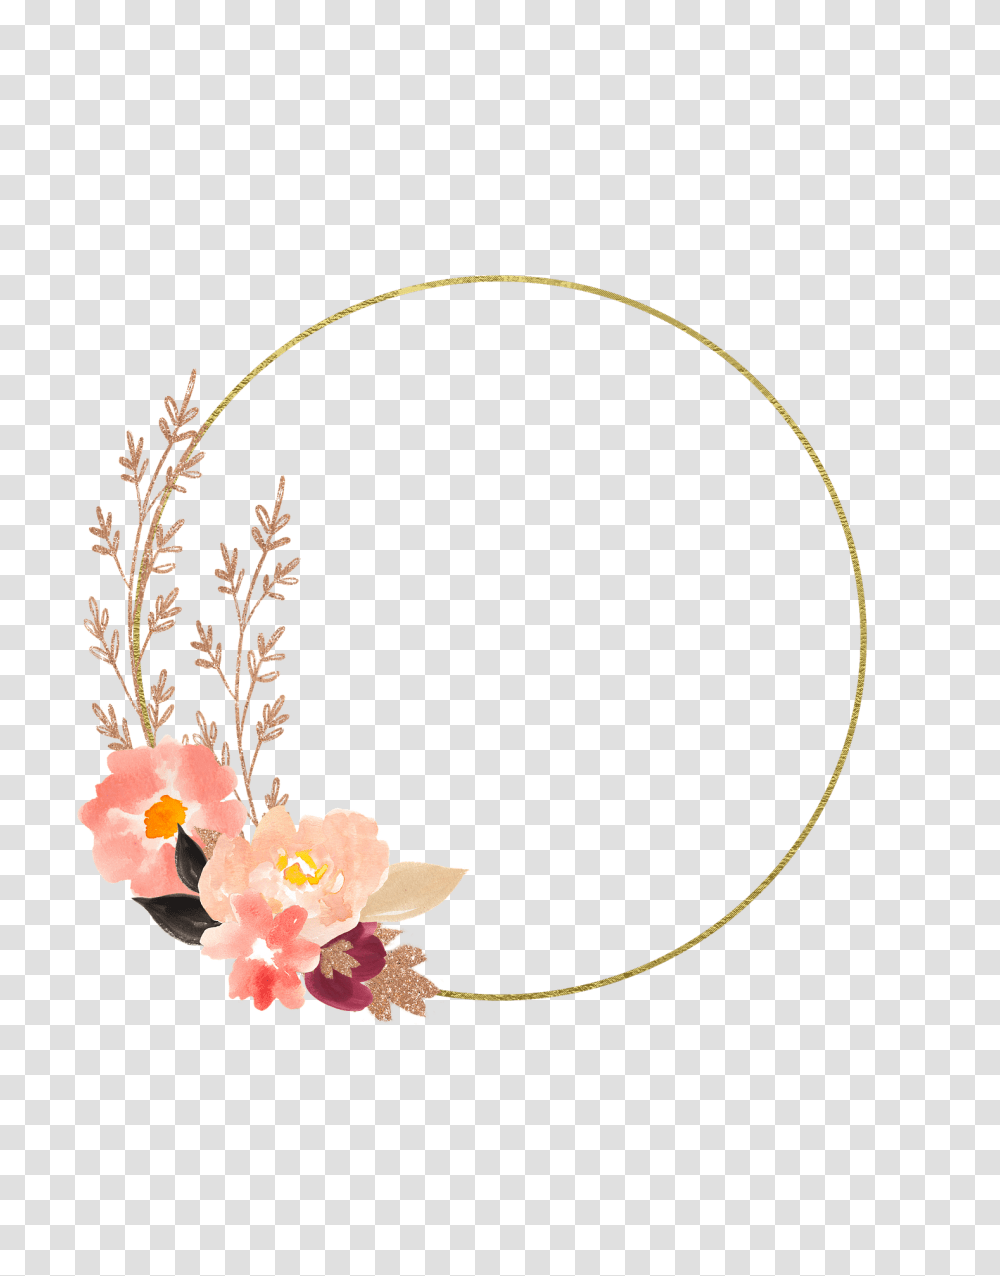 Watercolour Flowers Watercolor Free Image On Pixabay Watercolor Floral Circle, Graphics, Art, Floral Design, Pattern Transparent Png